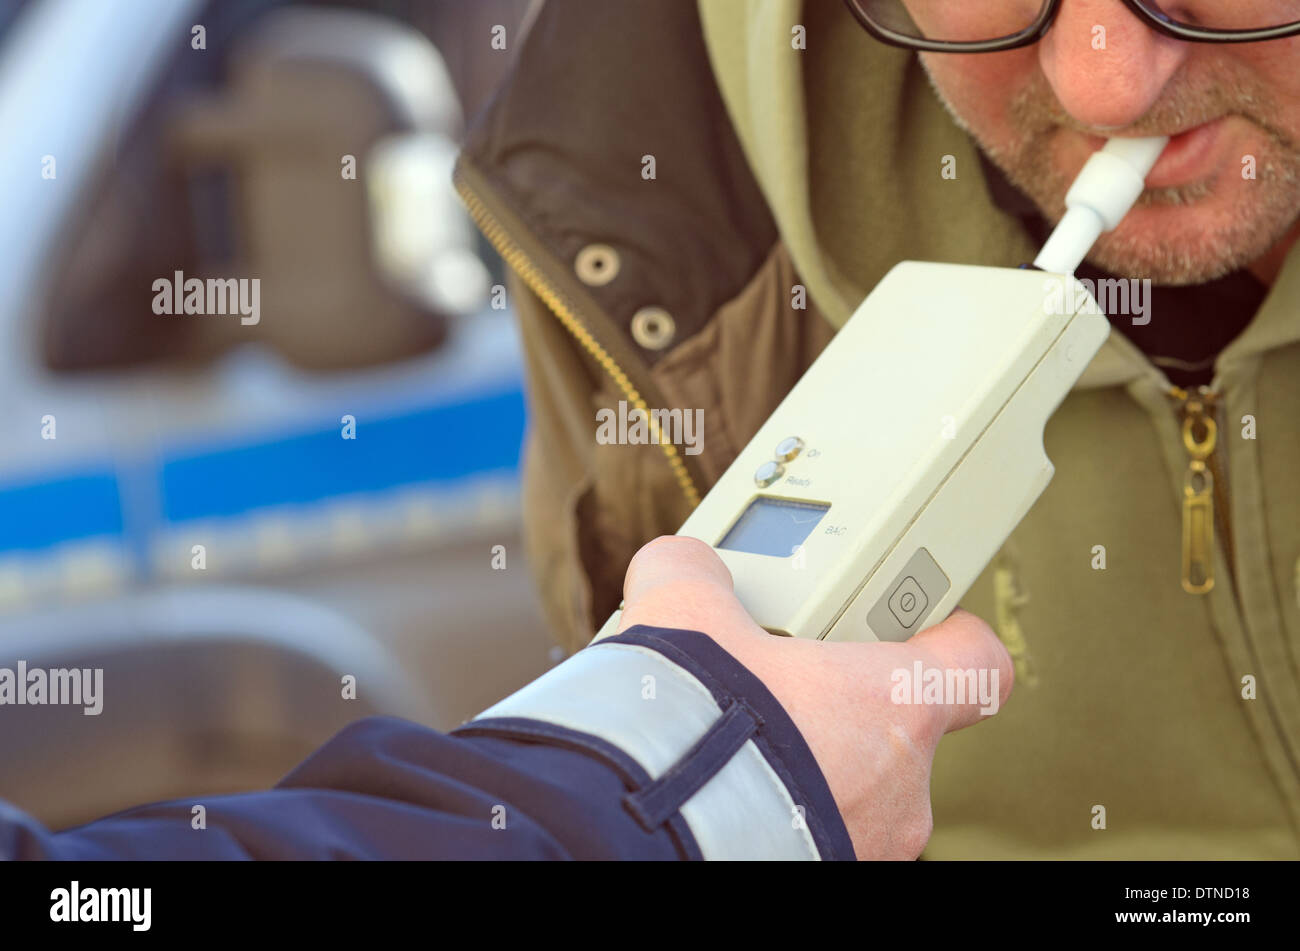 photo depicting clinical tests trzezewosci state driver by a policeman Stock Photo